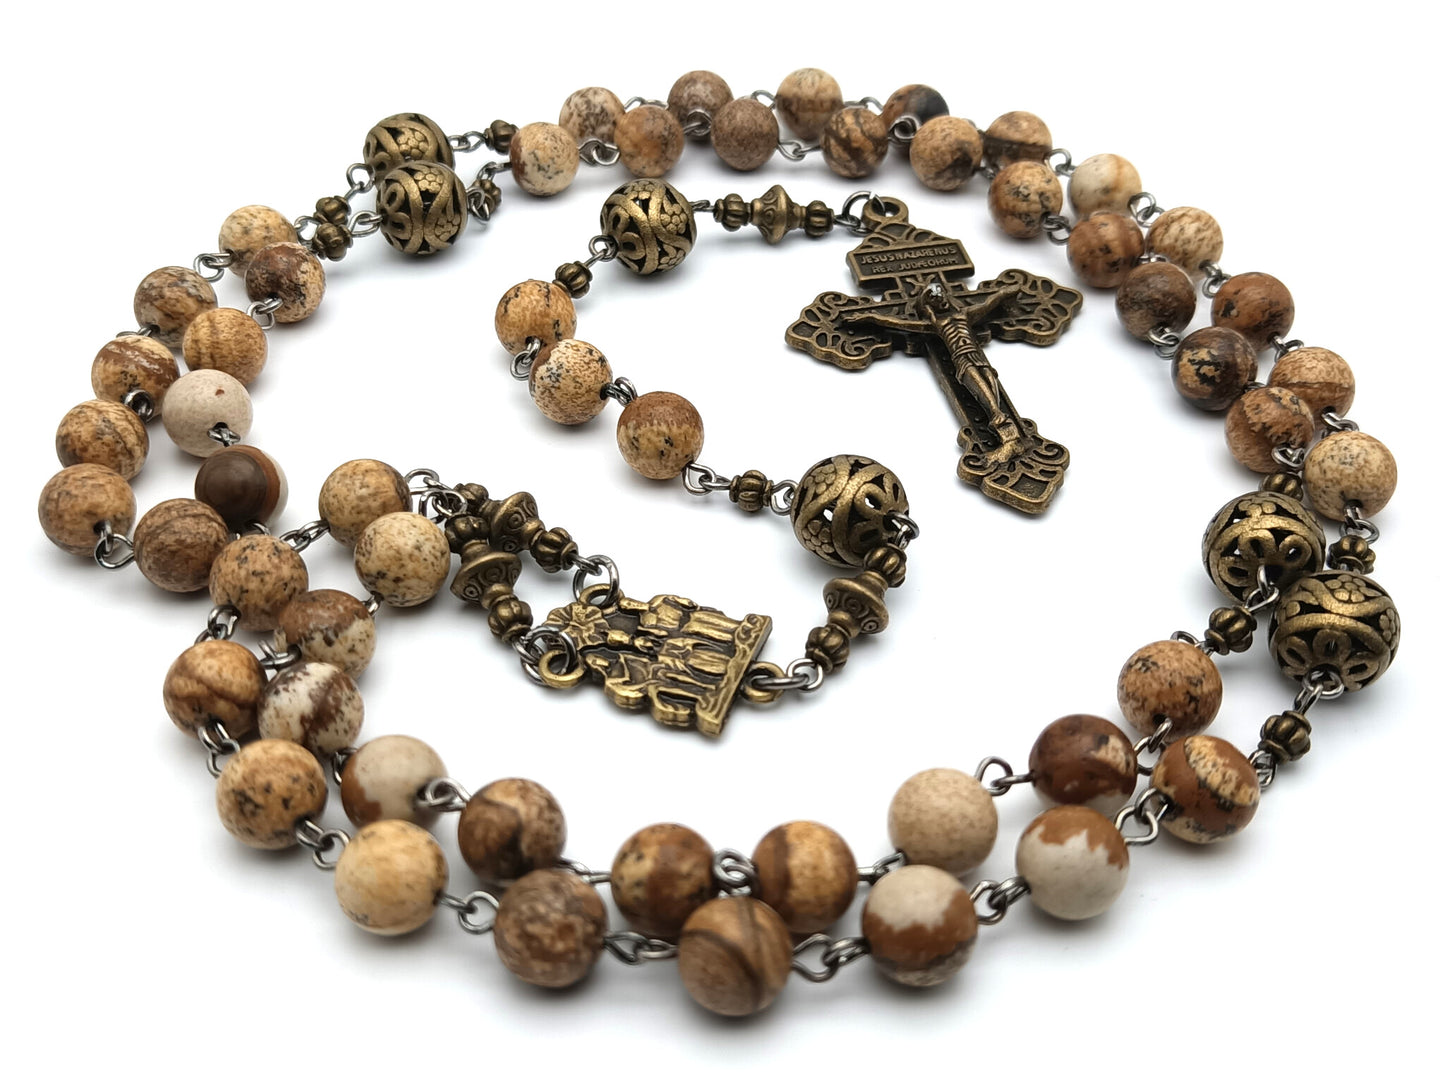 Vintage style unique rosary beads with natural jasper gemstone beads, bronze pardon crucifix, pater beads and Holy Trinity centre medal.